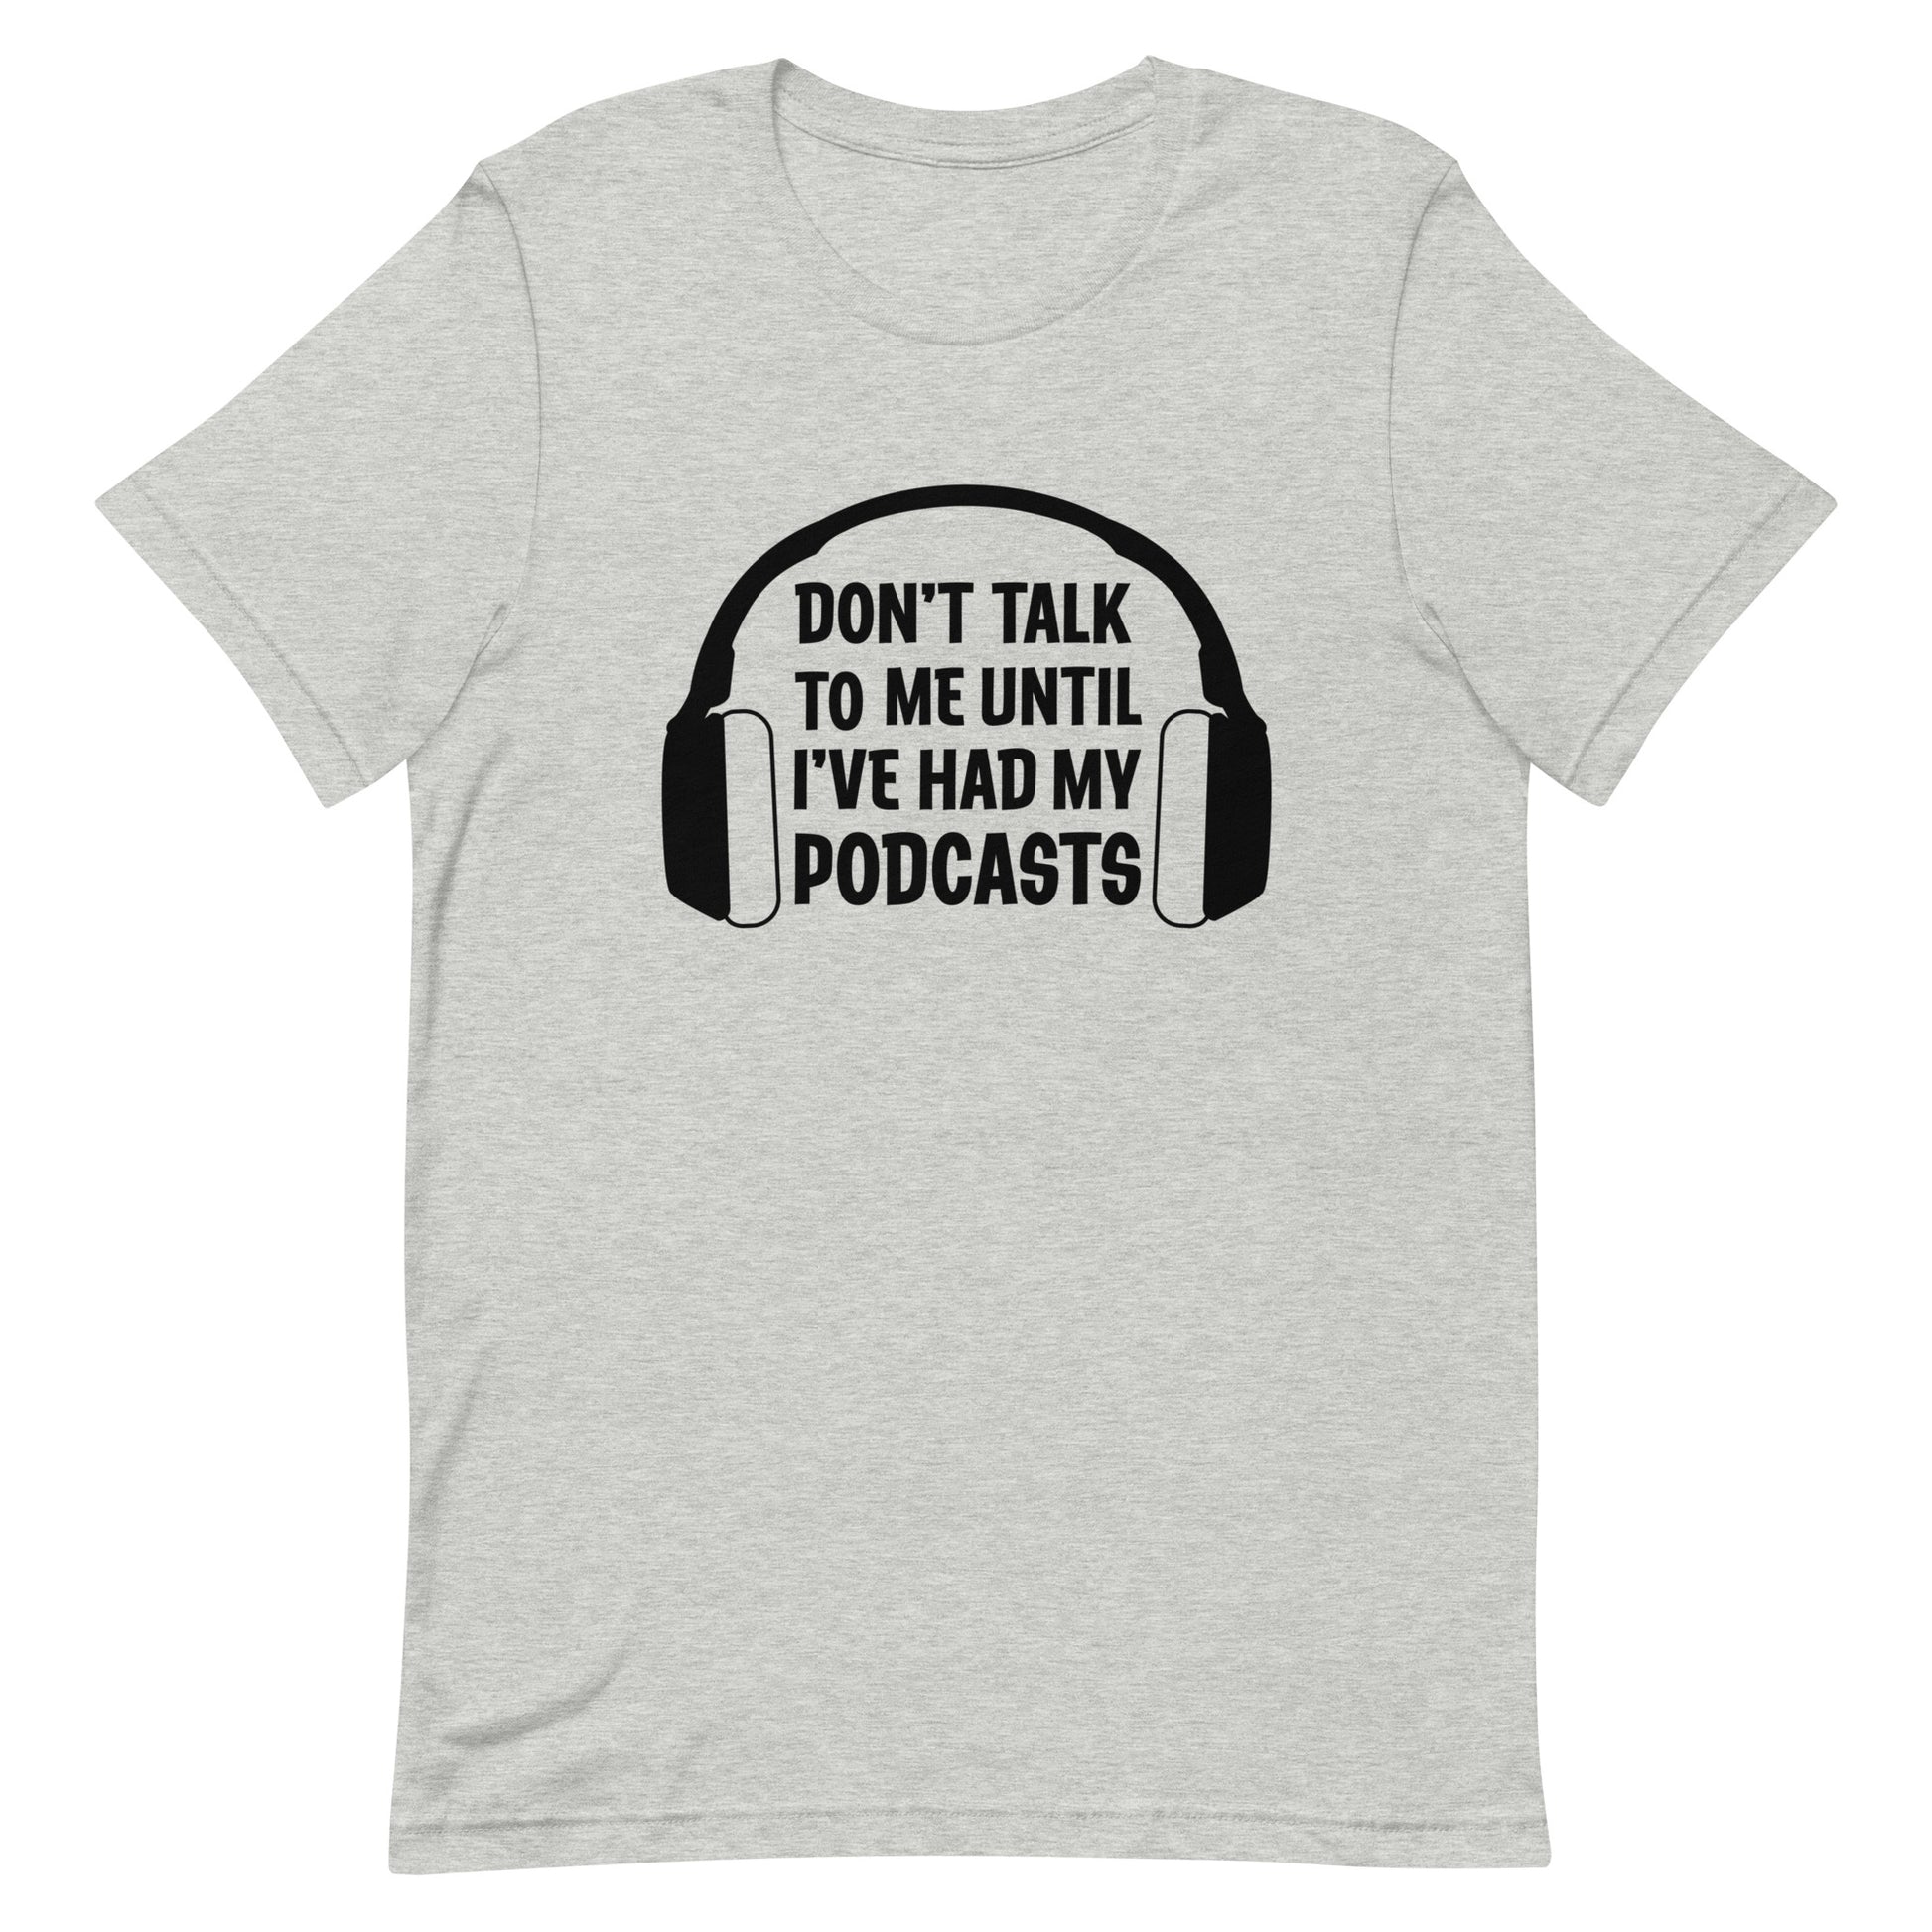 A light gray crewneck t-shirt featuring an image of headphones surrounding text reading "Don't talk to me until I've had my podcasts"